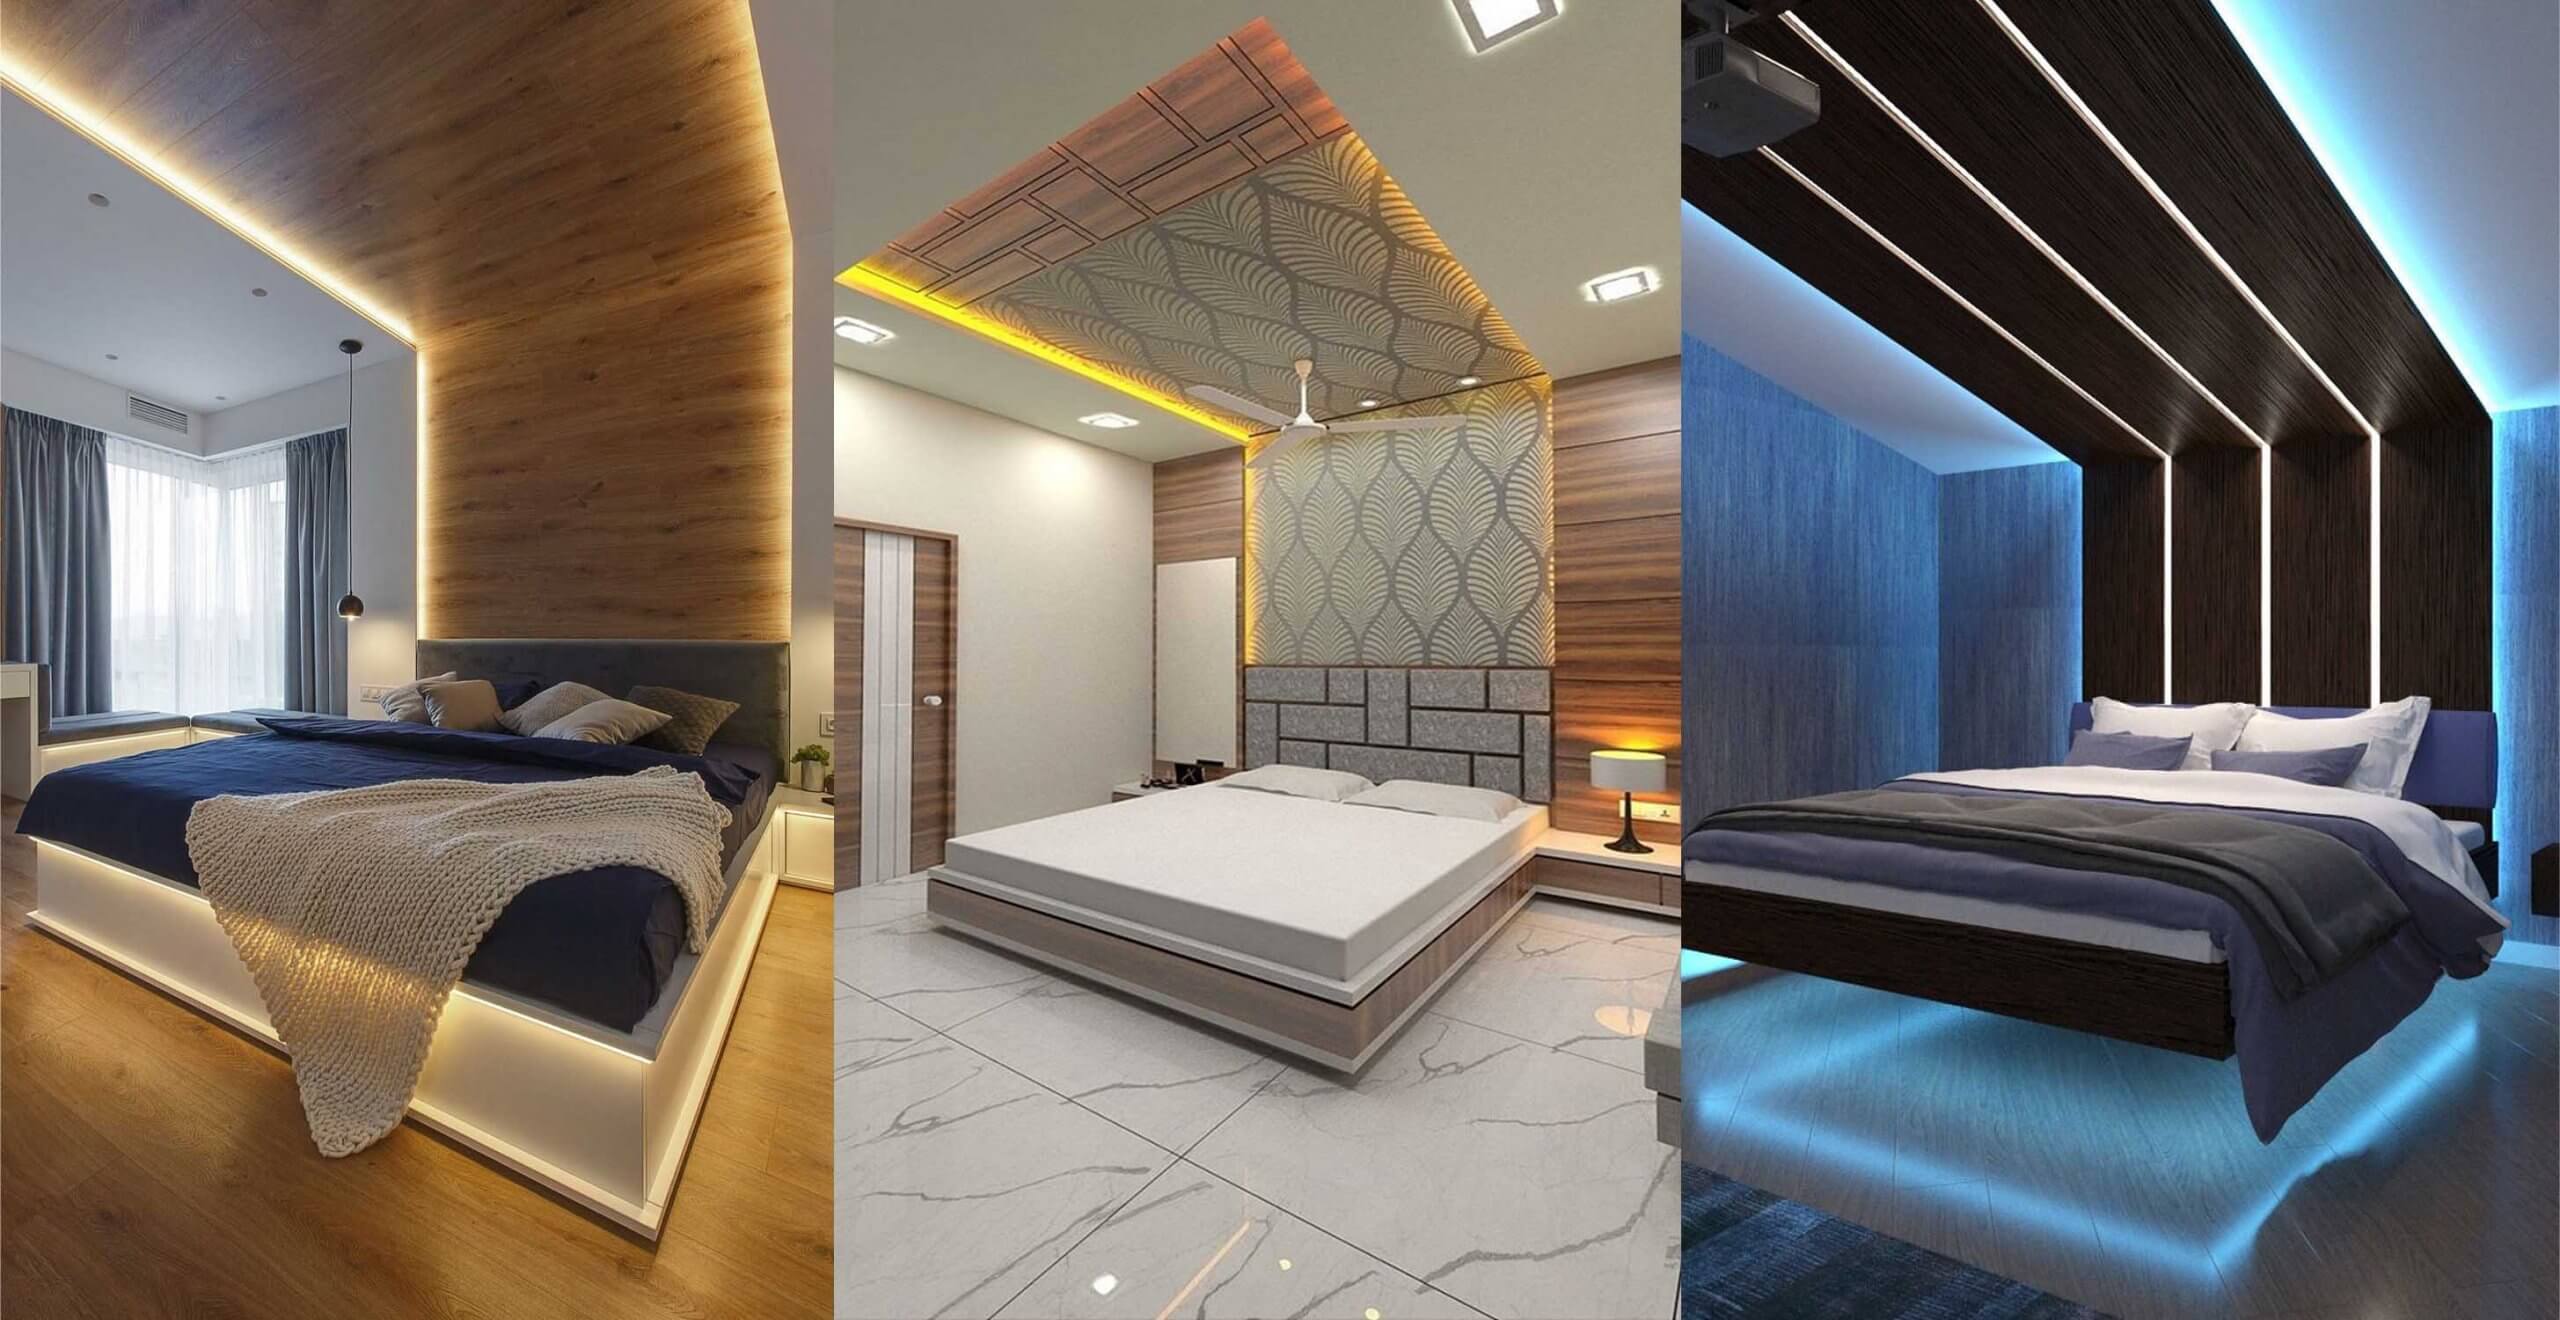 Incredible Modern Bedroom Design Ideas To Get Inspired - My Home My Zone